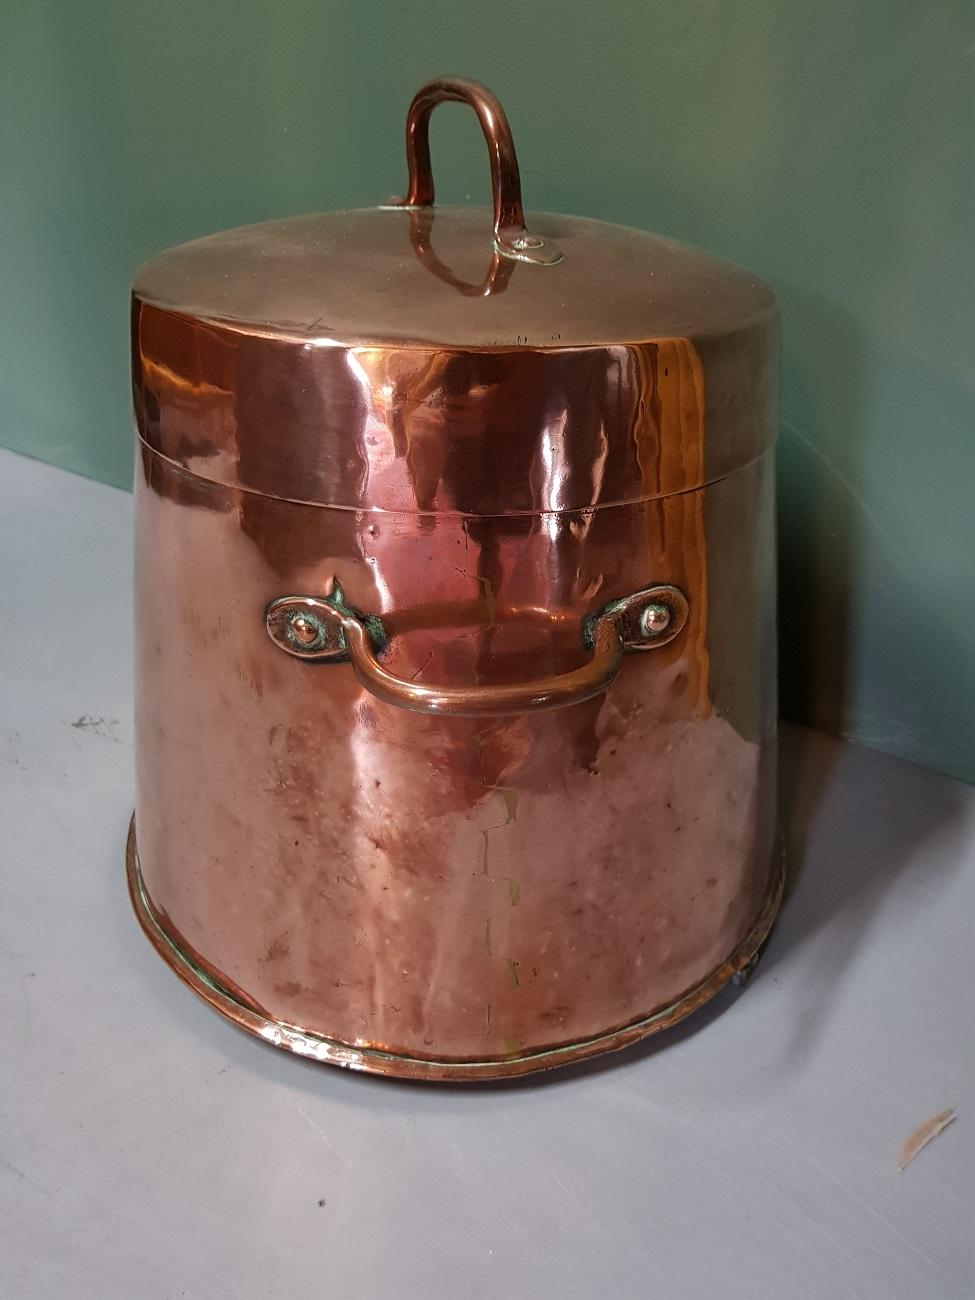 Antique Dutch red copper coal bin with riveted ears and standing on small red copper legs, early 18th century.

The measurements are,
Depth 36.5 cm/ 14.3 inch.
Width 36.5 cm/ 14.3 inch.
Height 38 cm/ 14.9 inch.